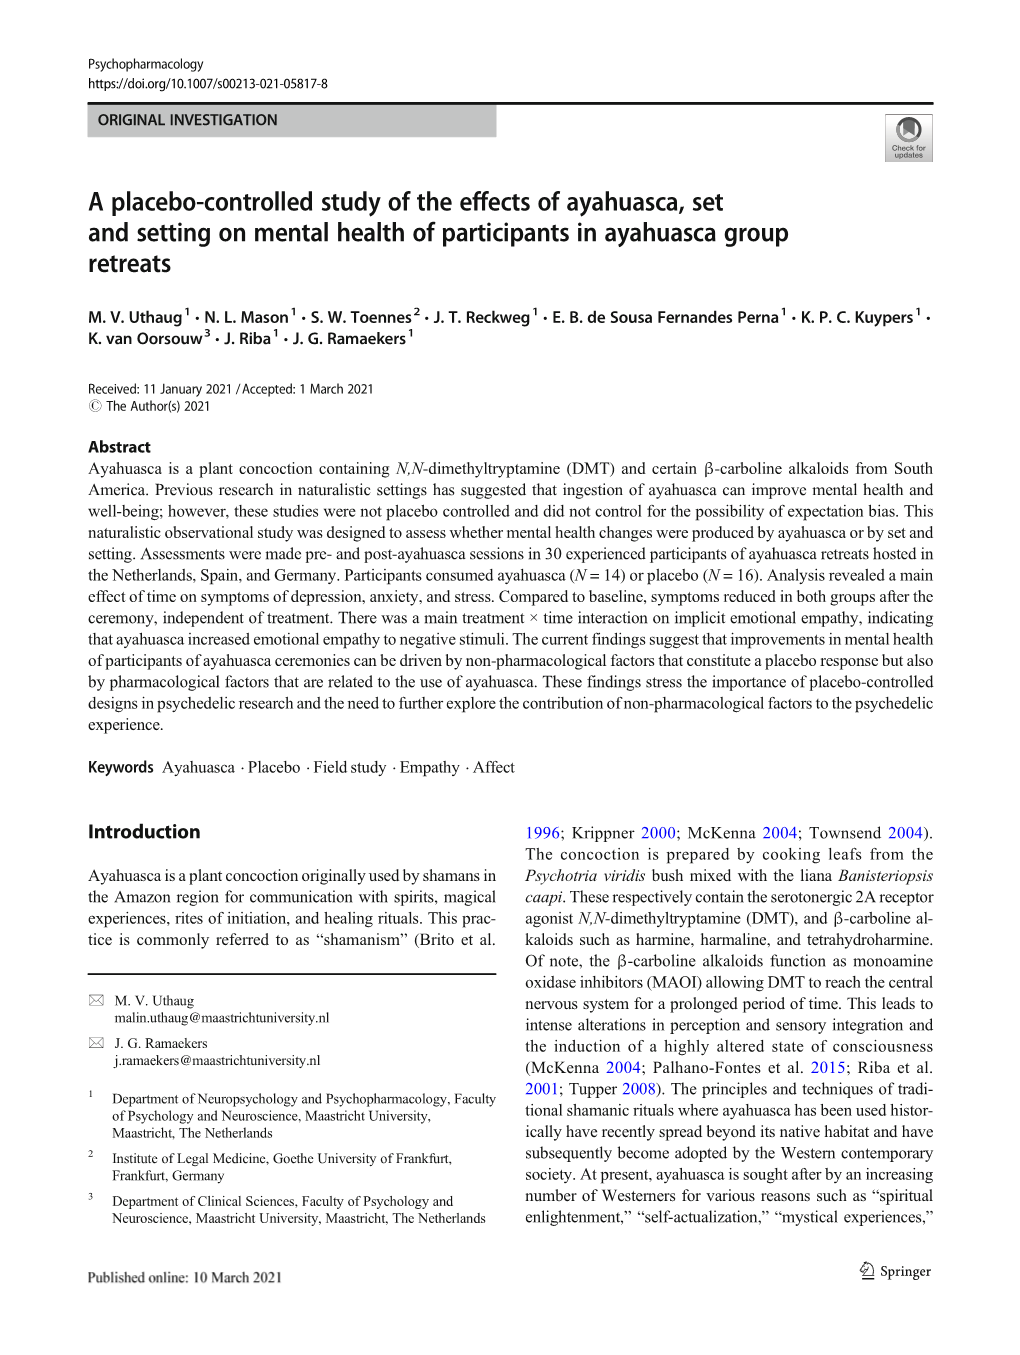 A Placebo-Controlled Study of the Effects of Ayahuasca, Set and Setting on Mental Health of Participants in Ayahuasca Group Retreats